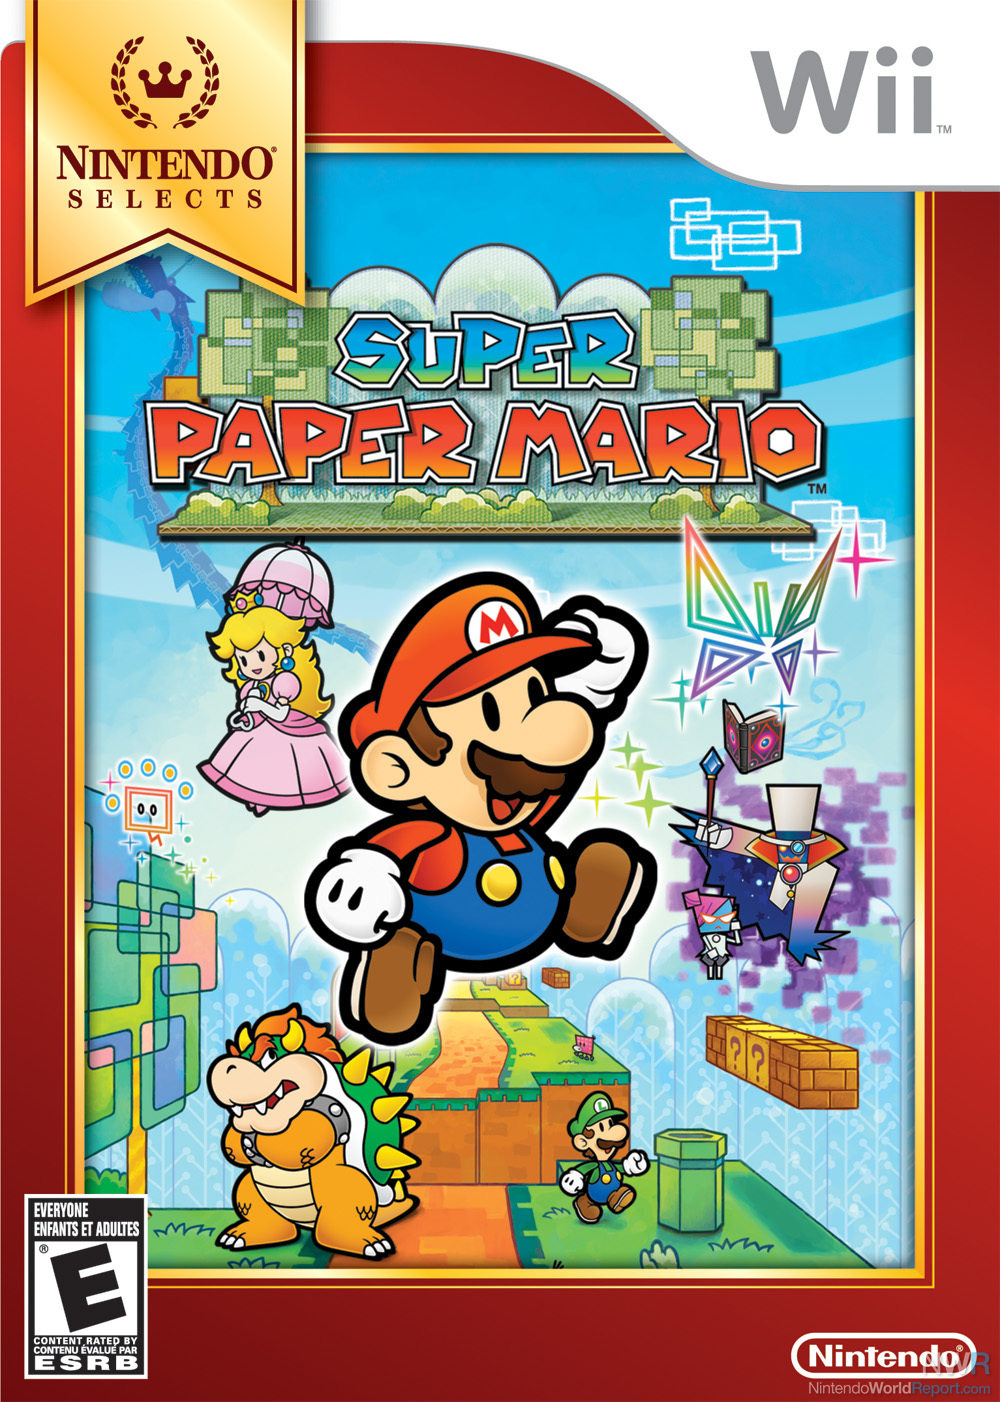 Four More Games Added to Nintendo Selects - News - Nintendo World Report